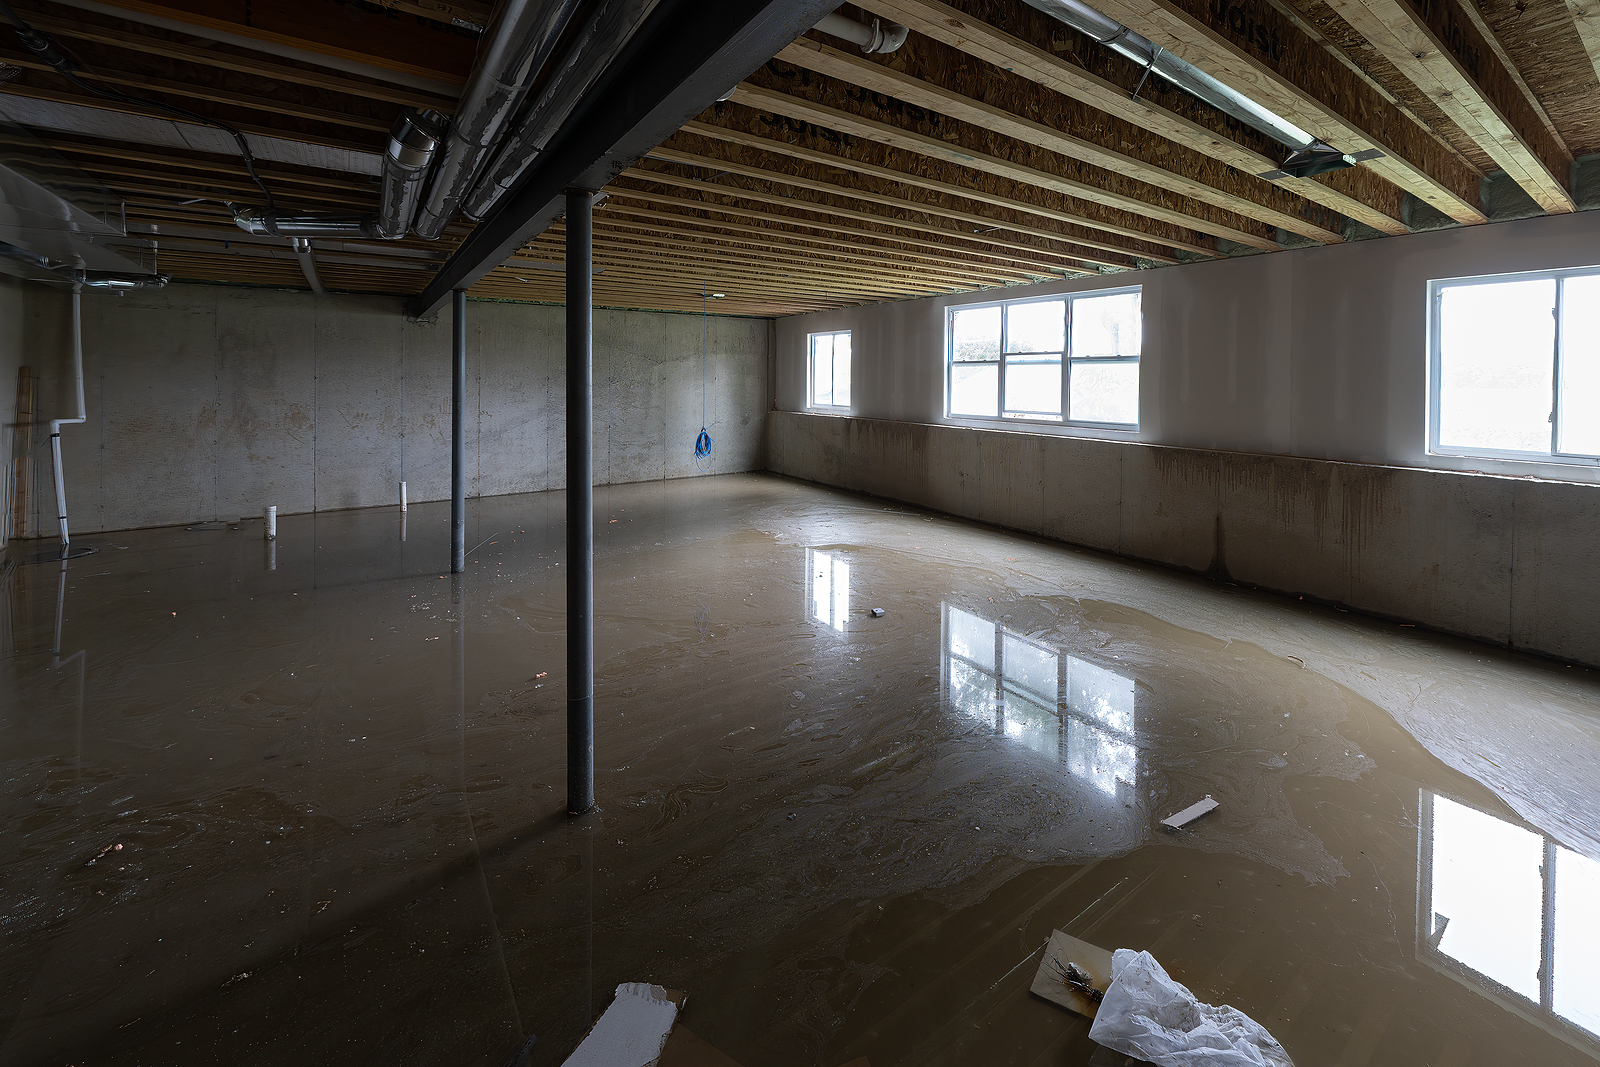 Flooded Basement. Would Your Homeowner's Insurance Protect You?